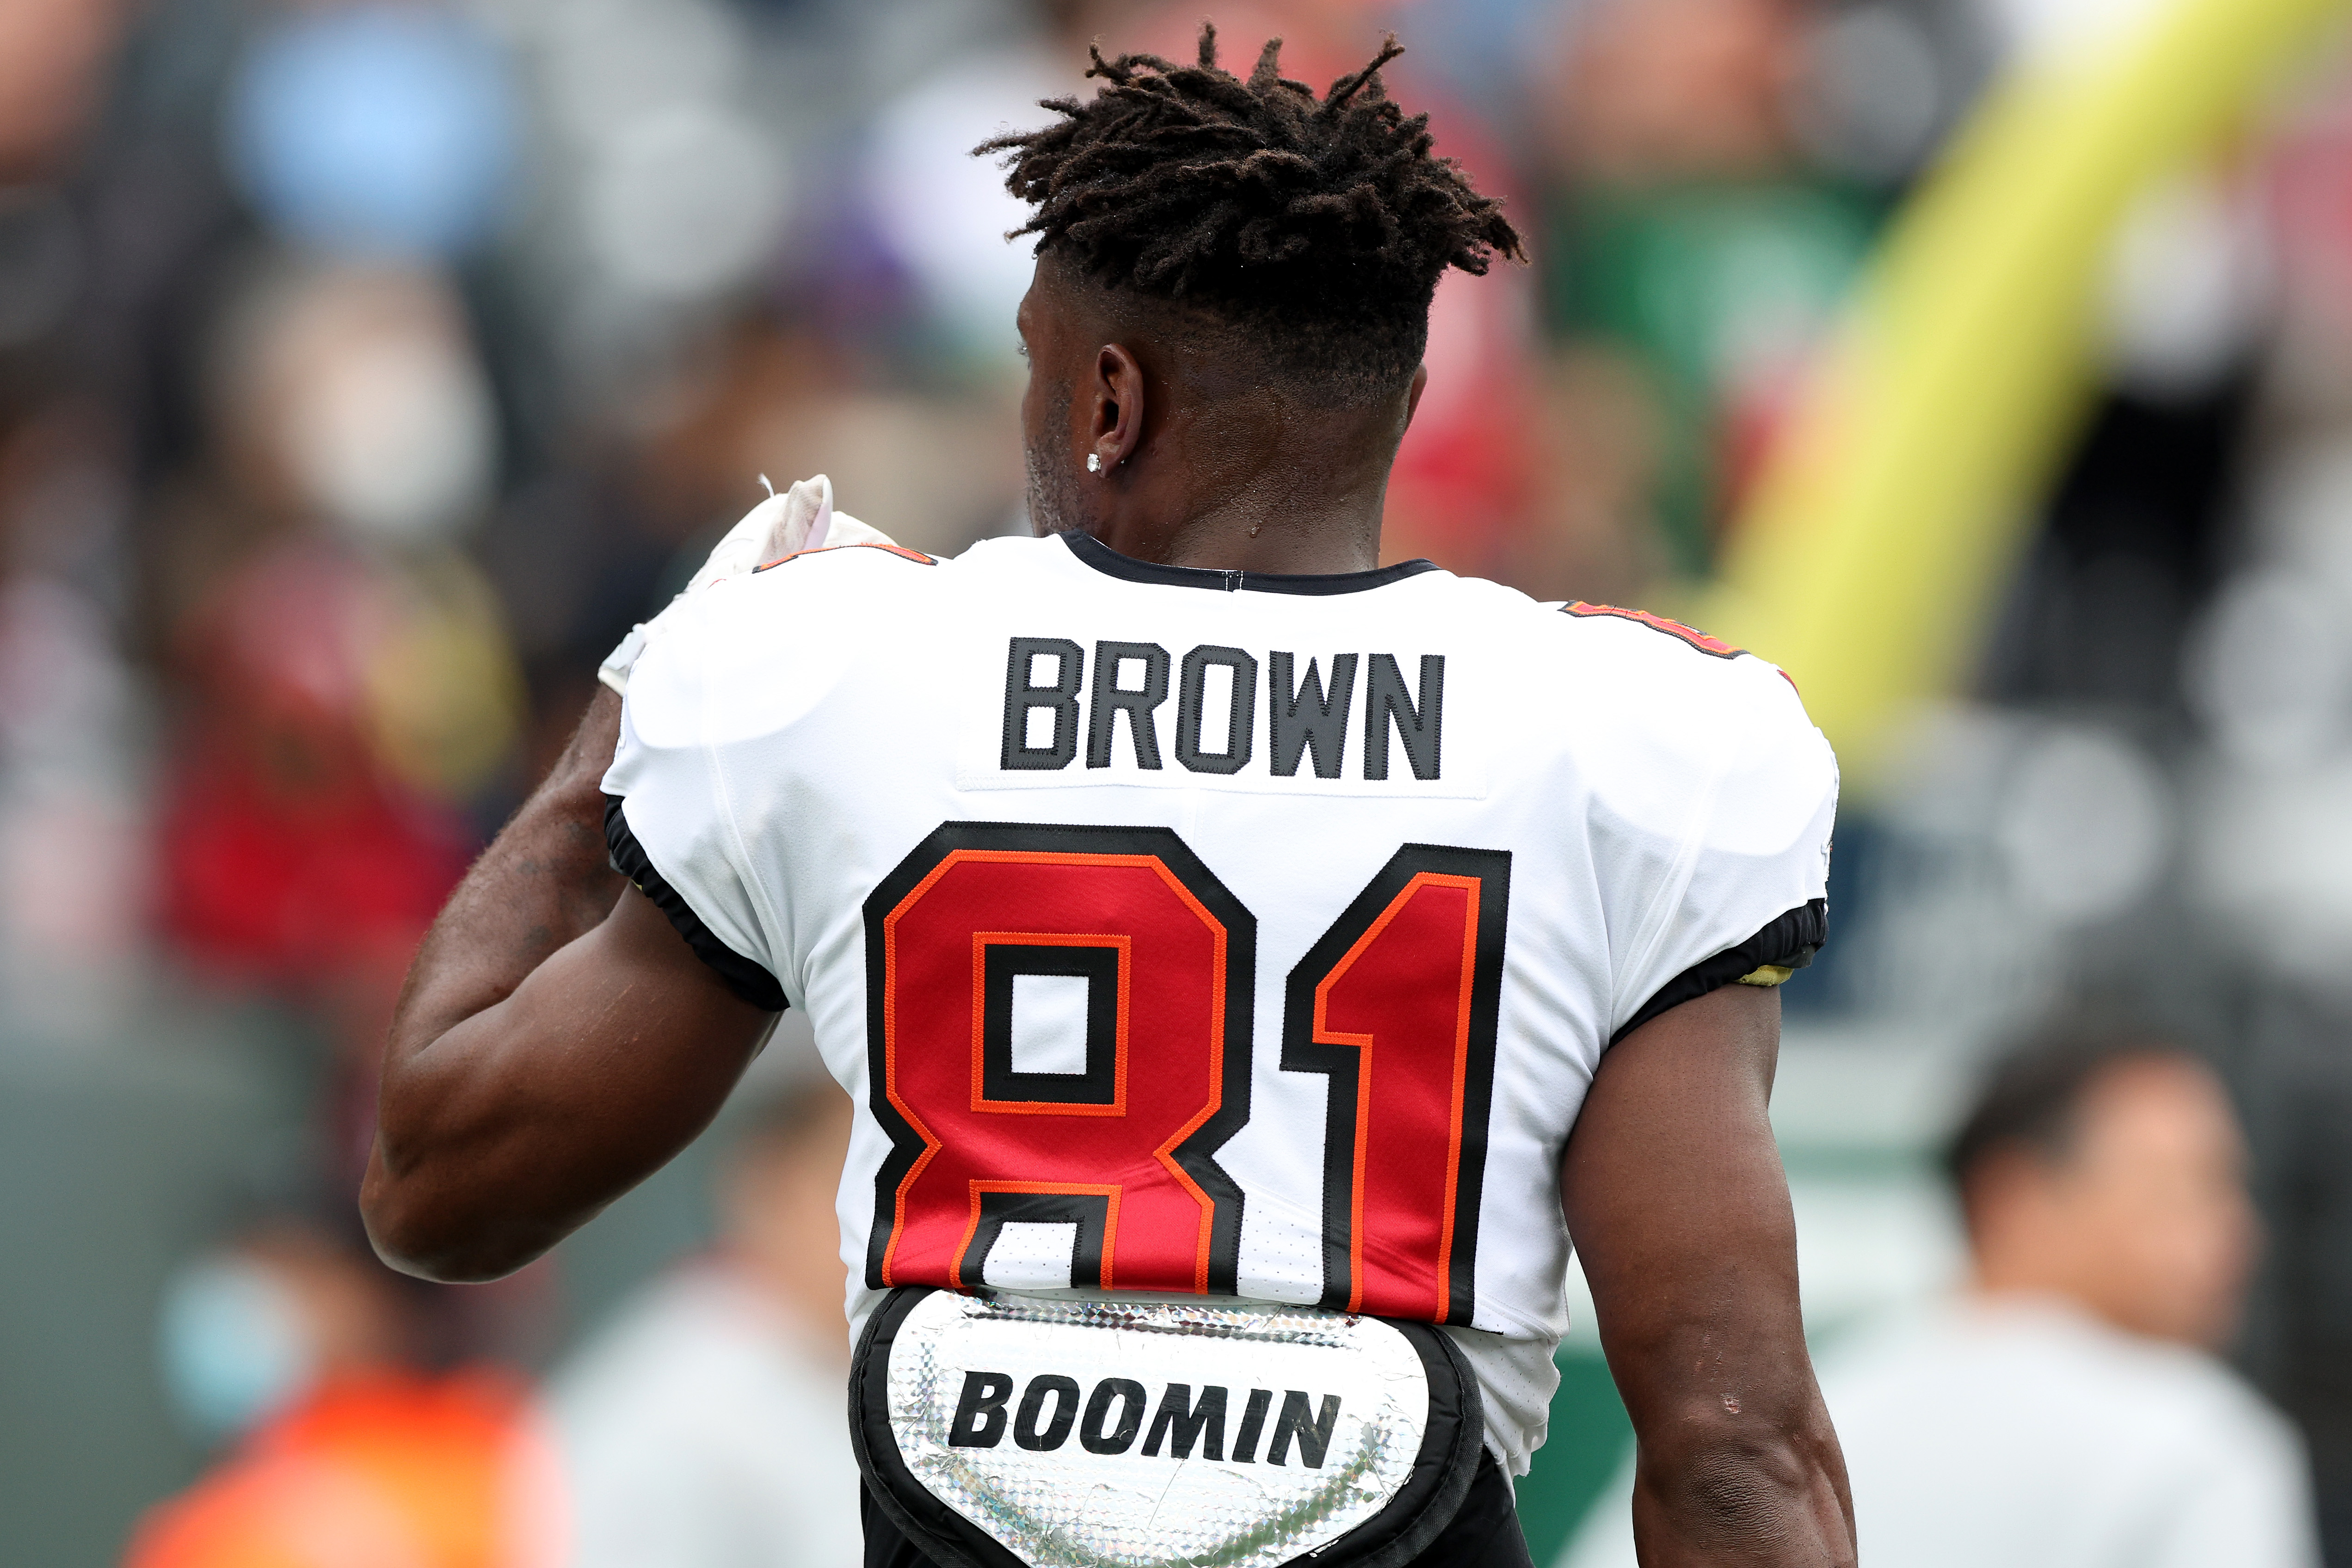 Antonio Brown walked off the Buccaneers sideline Sunday and was released